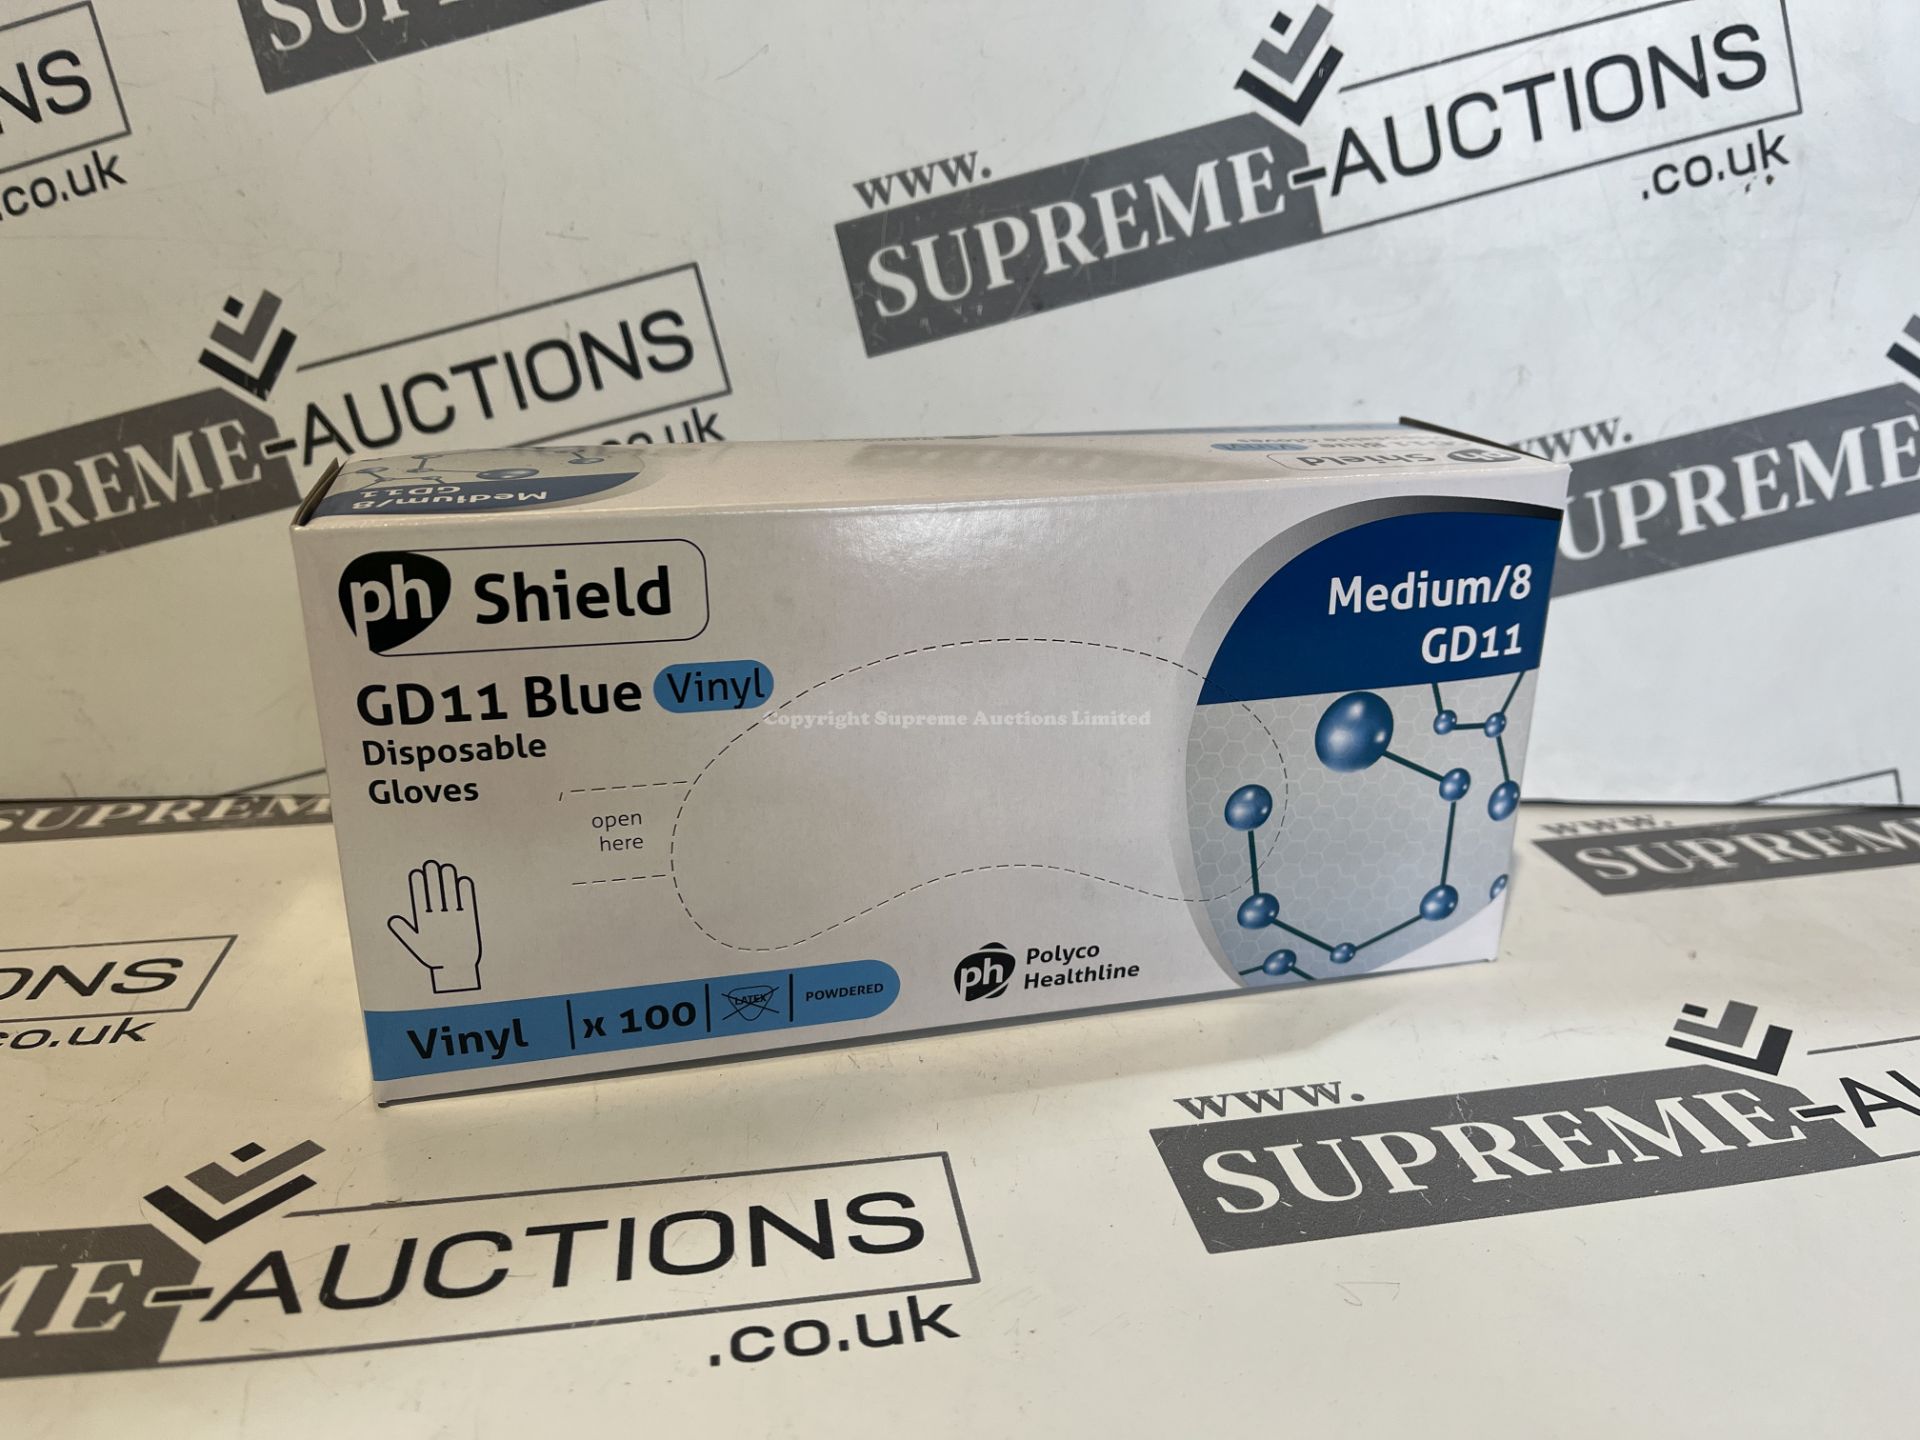 50 X BRAND NEW PACKS OF 100 PH SHIELD BLUE VINYL DISPOSABLE GLOVES POWDERED SIZE MEDIUM EXP MARCH